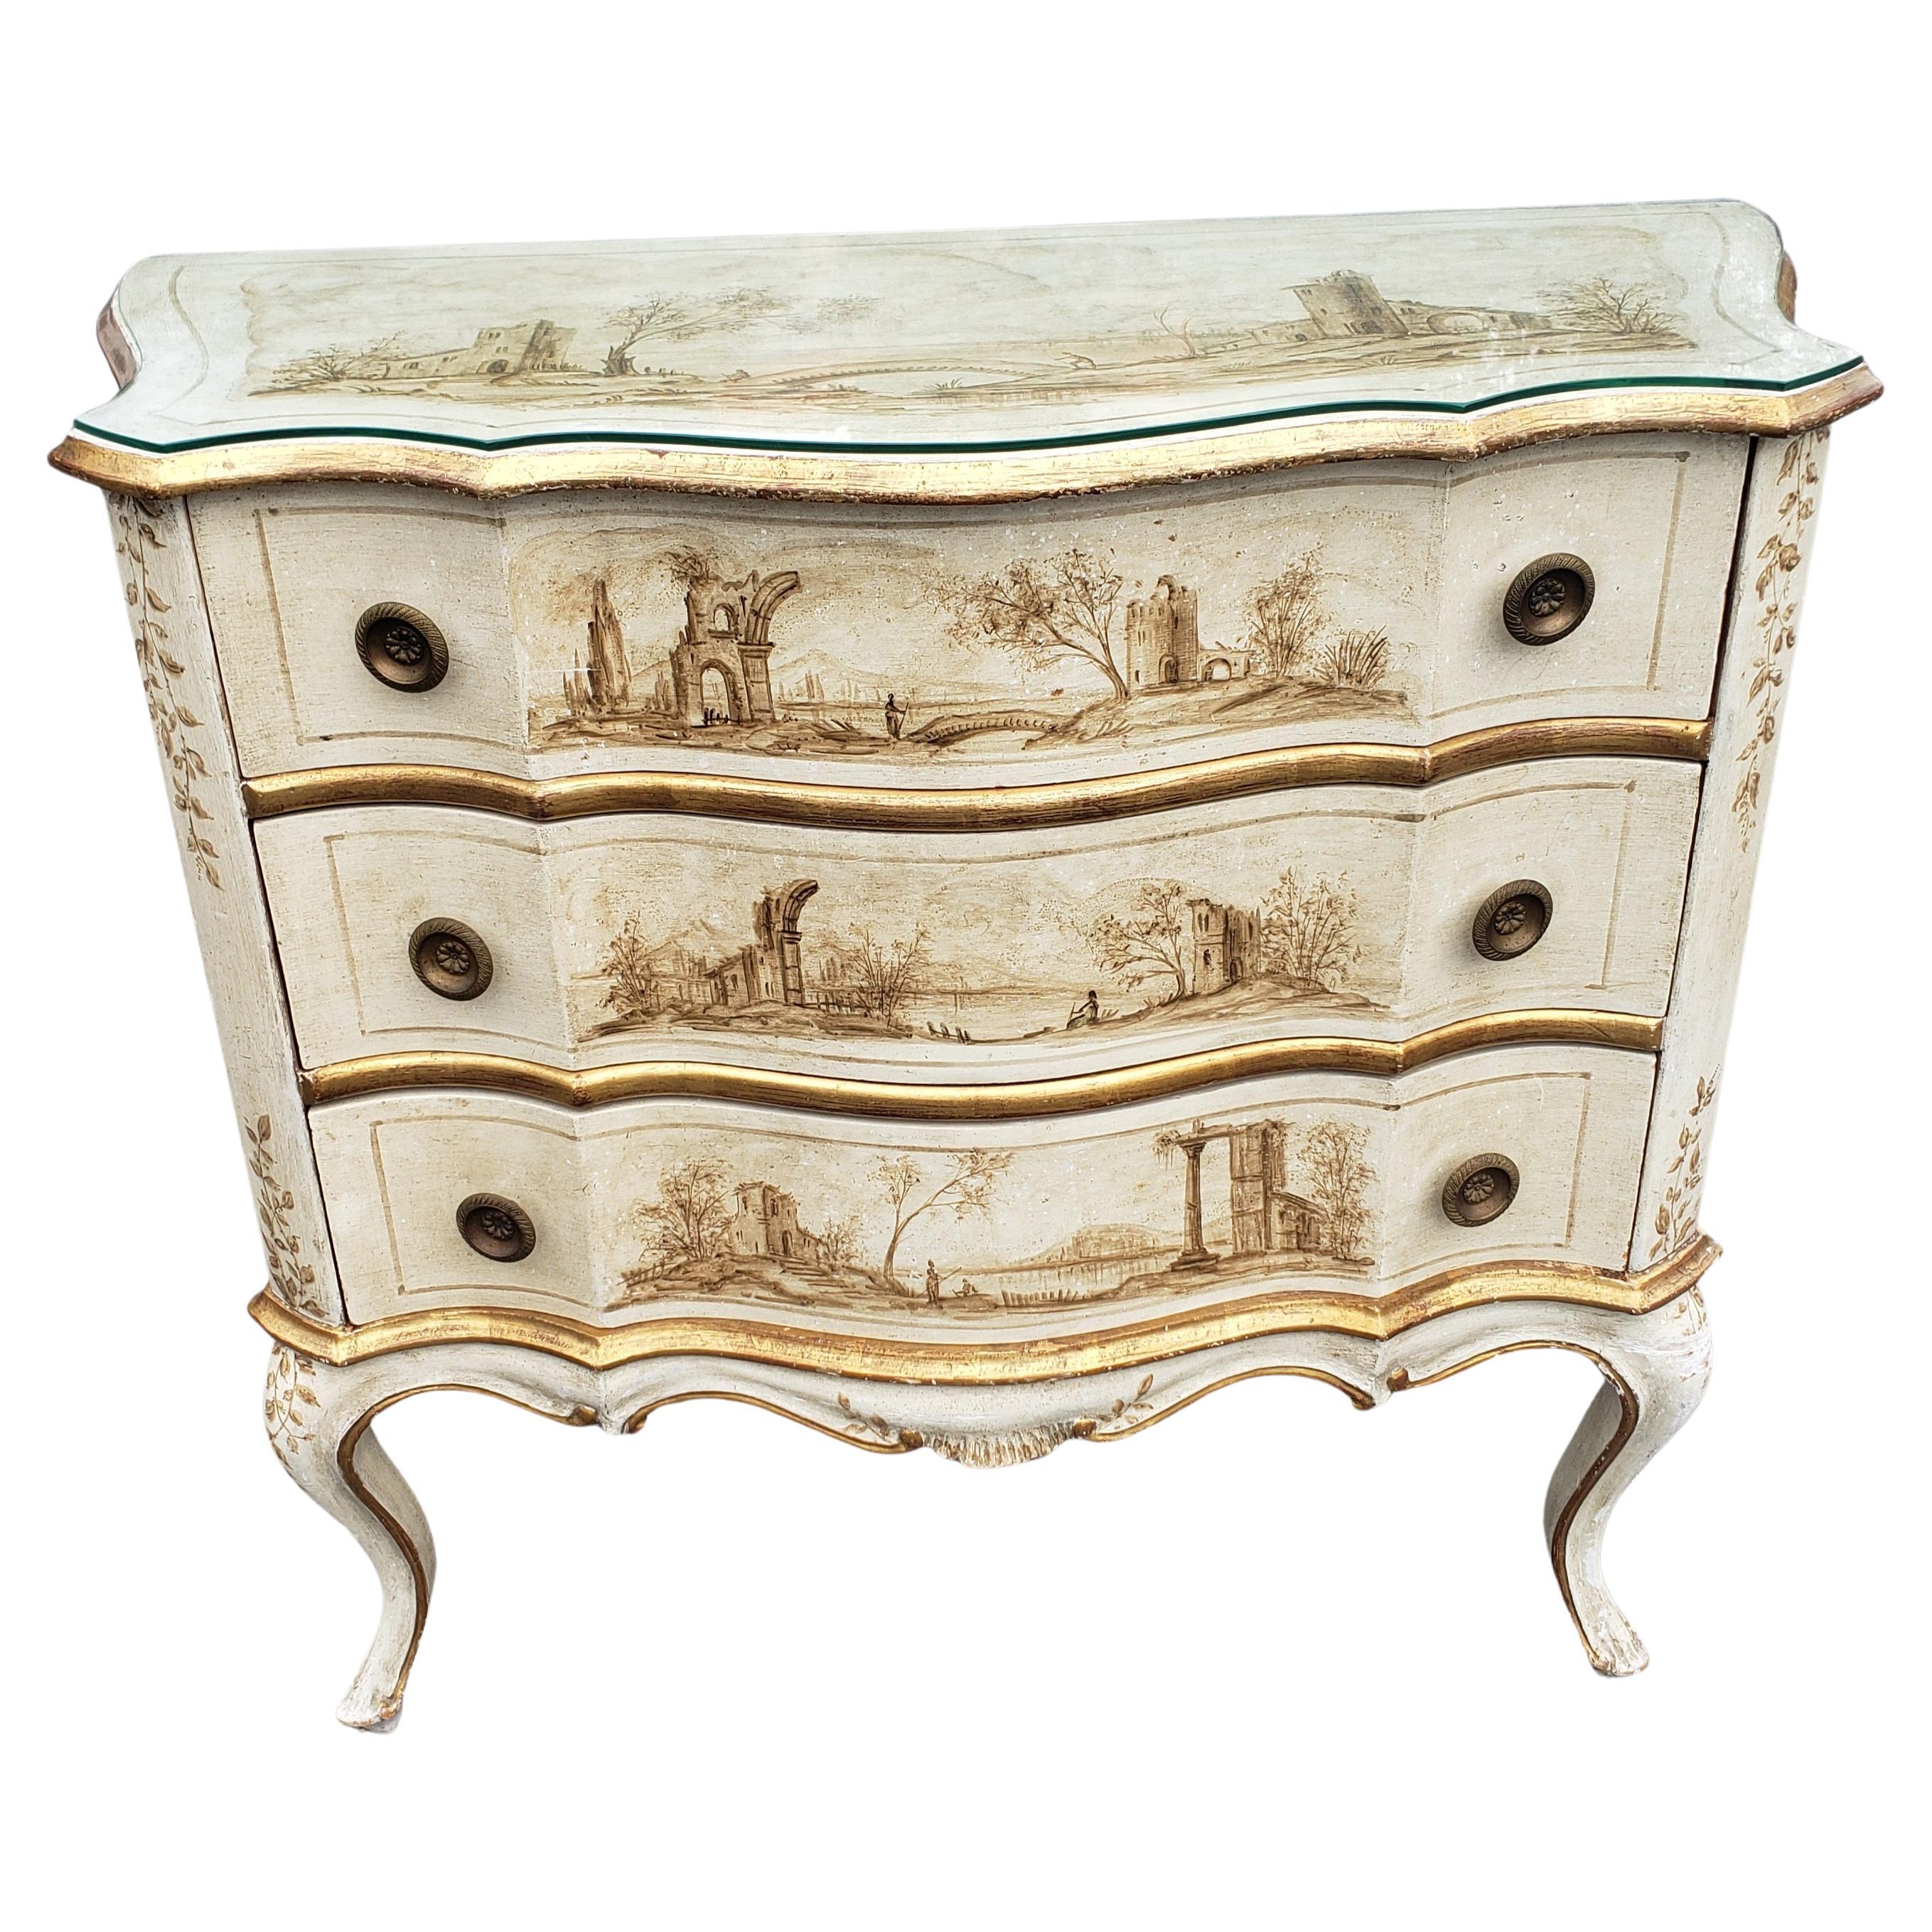 Early 20th C. Venetian Hand-Painted and Decorated Partial Gilt Commode w/ Glass